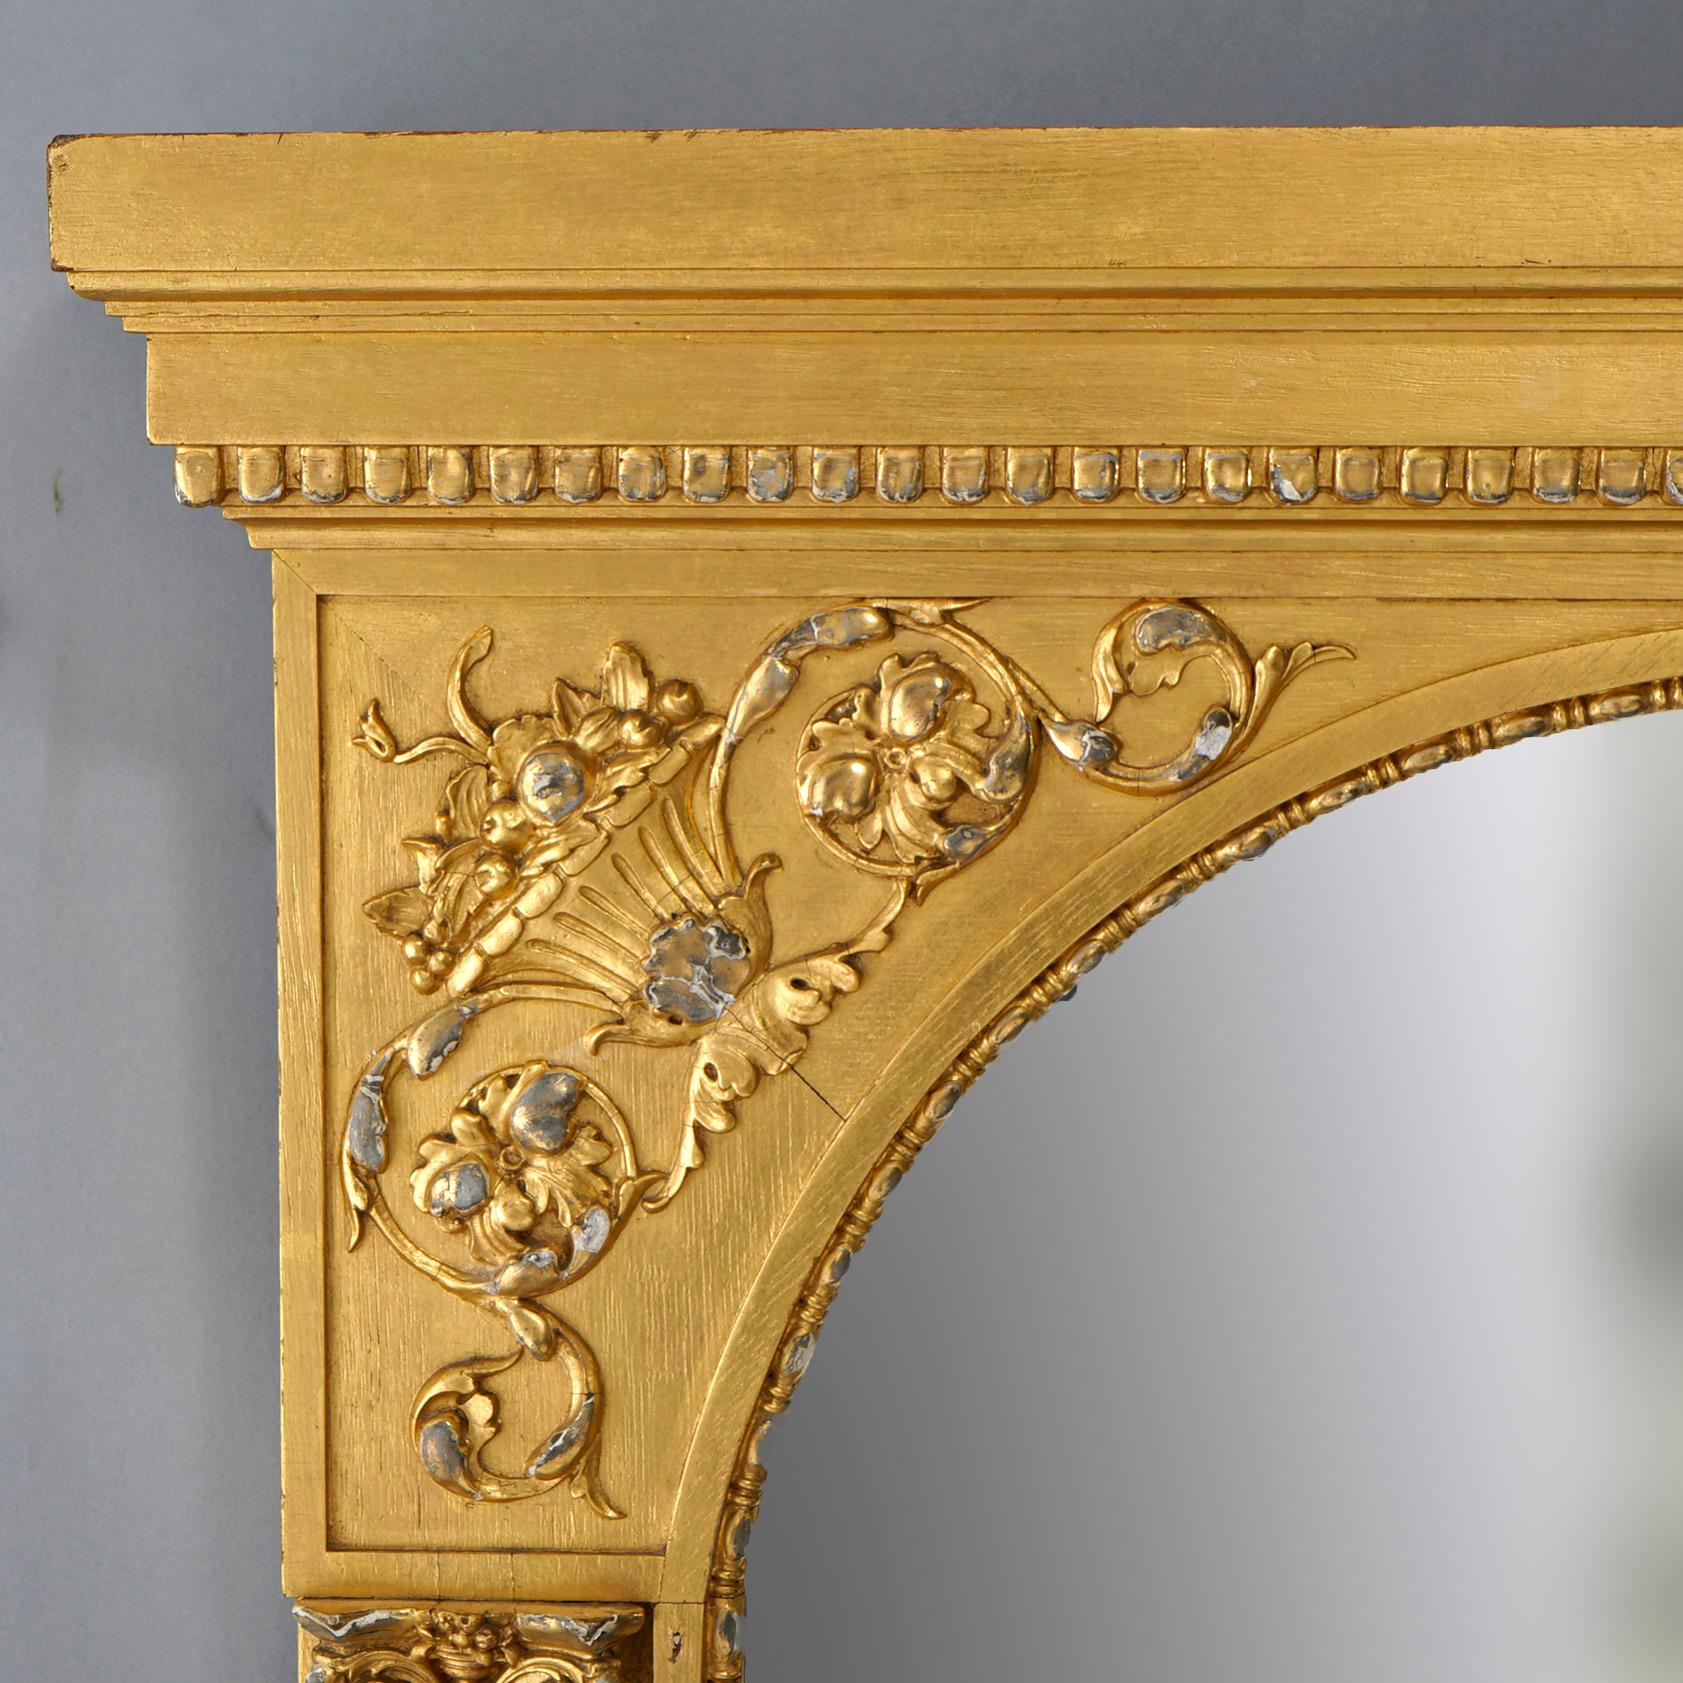 An antique French Empire classical style wall mirror offers giltwood construction with frame crest having floral, foliate and panier de fleur elements over arched mirror with flanking Greco reeded column supports, 19th century

Measures- 29.75'' H x